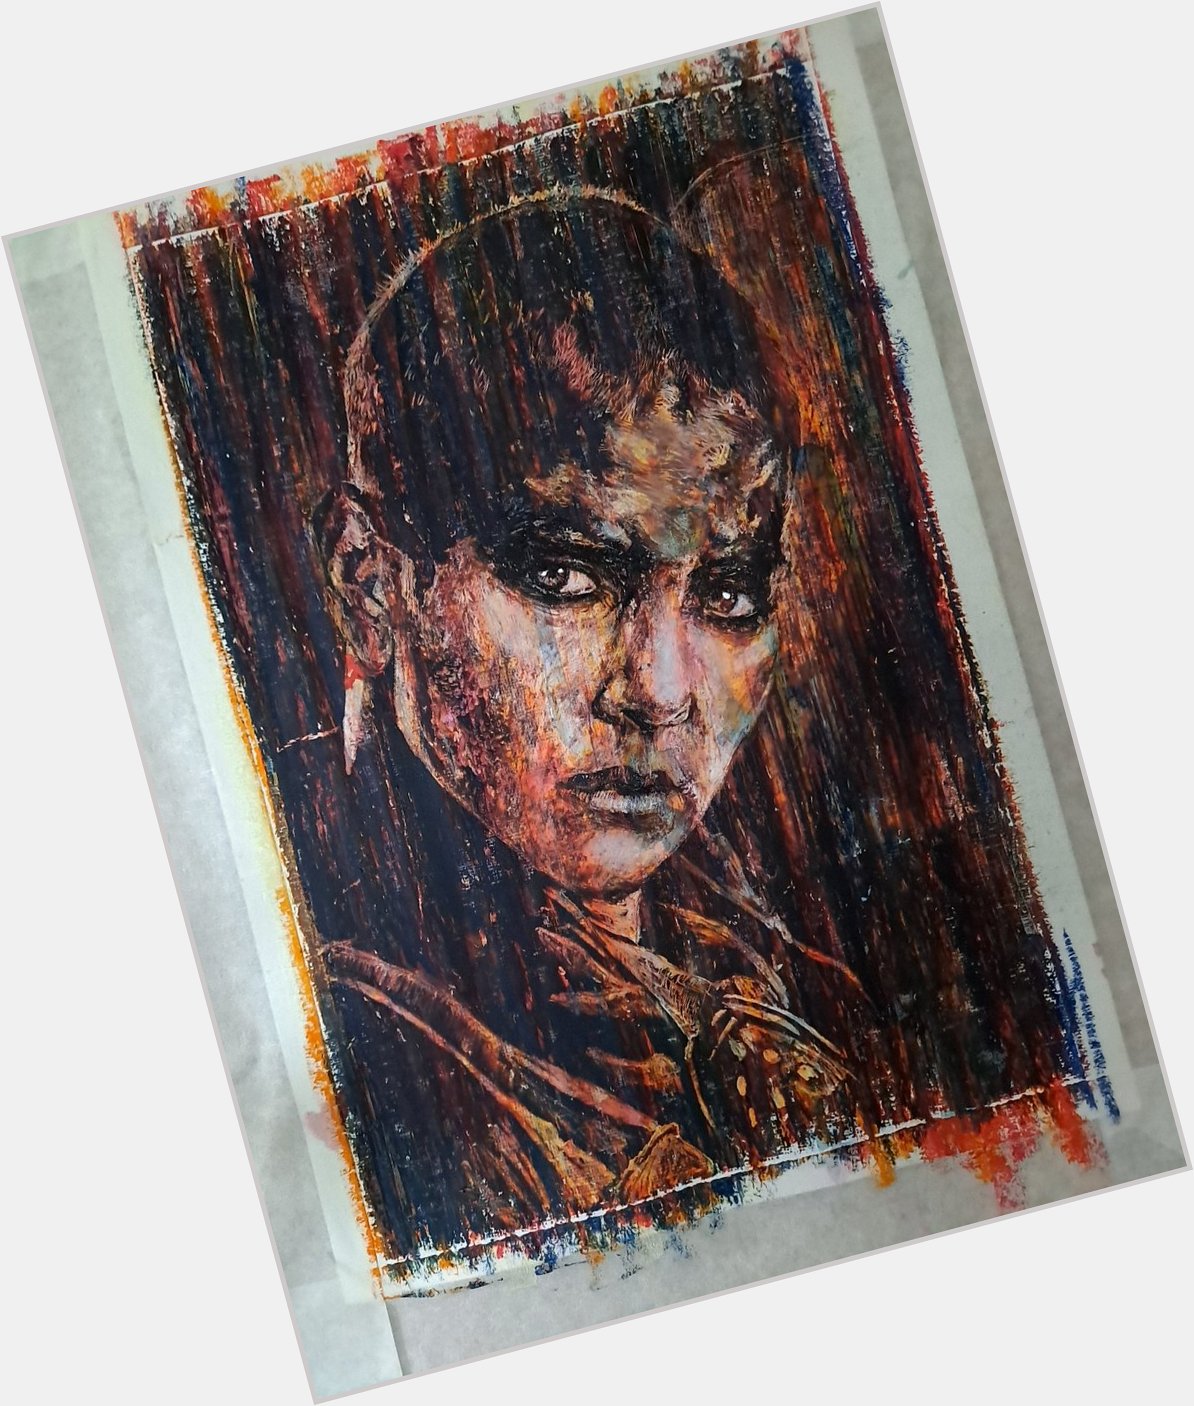 Happy birthday Charlize Theron! Oil and ink on acrylic paper, 21cm x 30cm. 